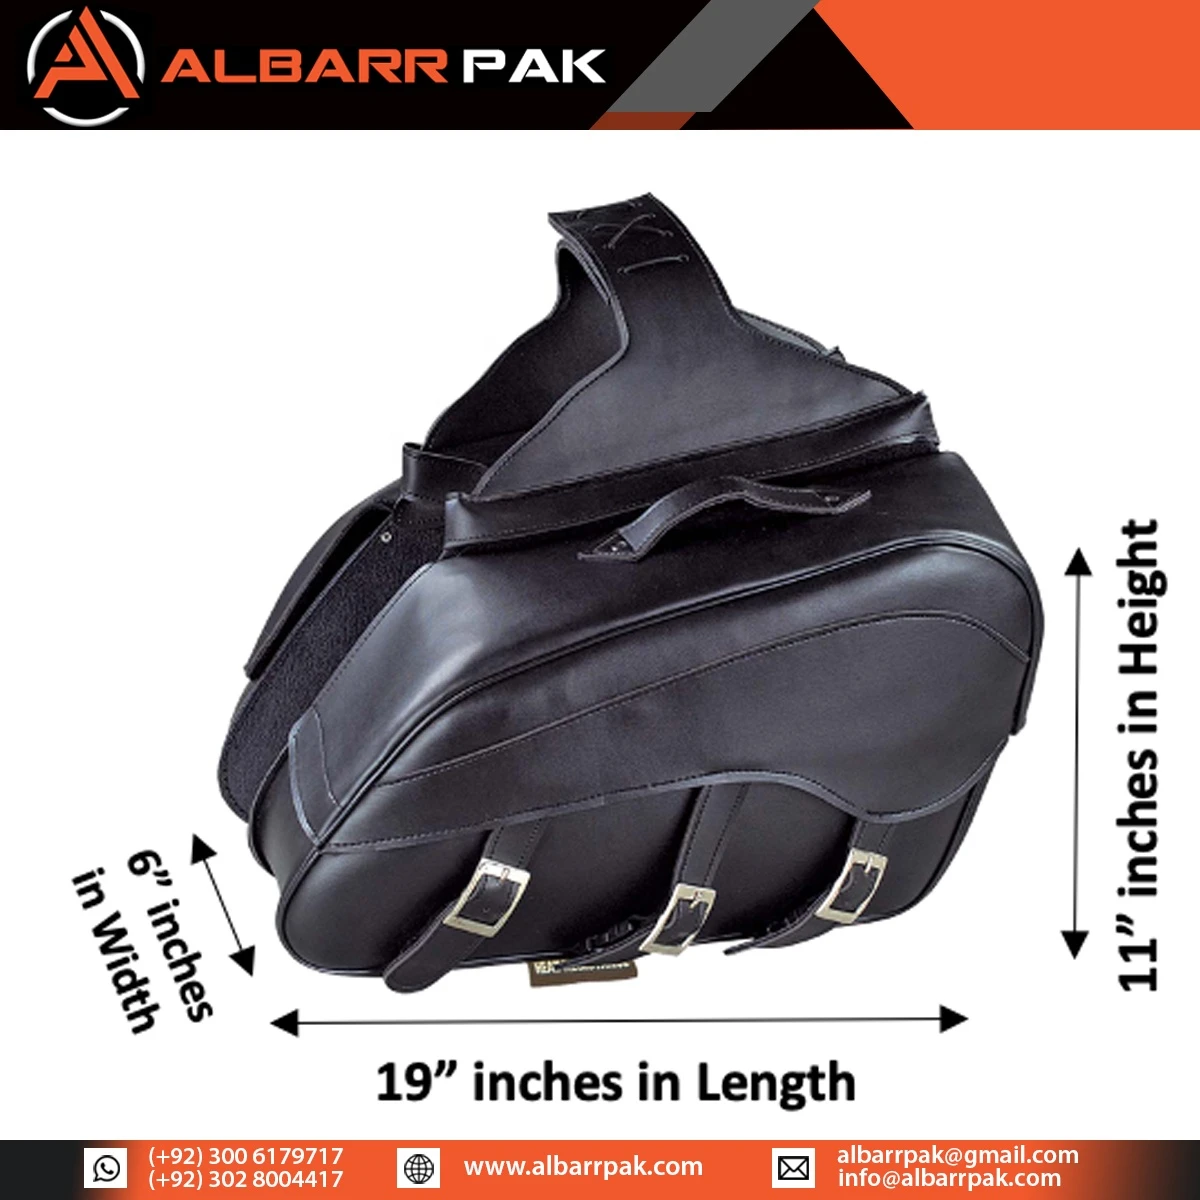 Motorcycle PU Leather Saddle Side Tool Bags Saddle Bag for all types of motorcycles - Albarr Pak